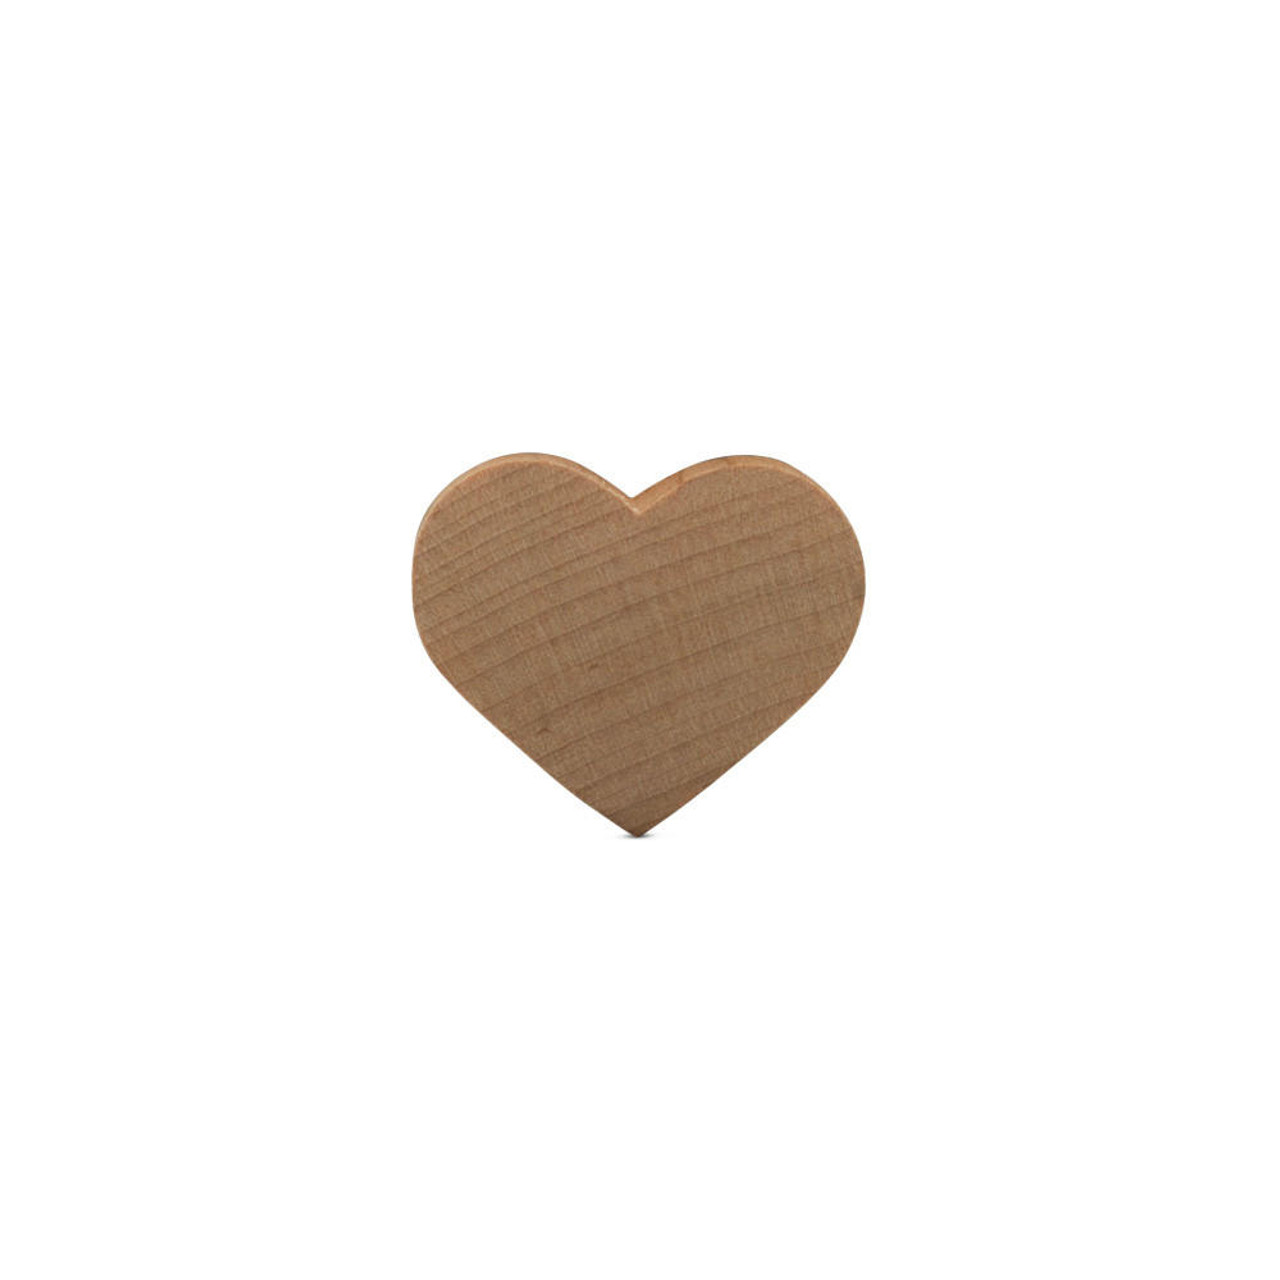 Small Wood Hearts 1-1/2 inch, 1/4 inch Thick, Pack of 250 Heart Shaped Wood  for Crafts/Rustic Bridal Shower Decorations, by Woodpeckers